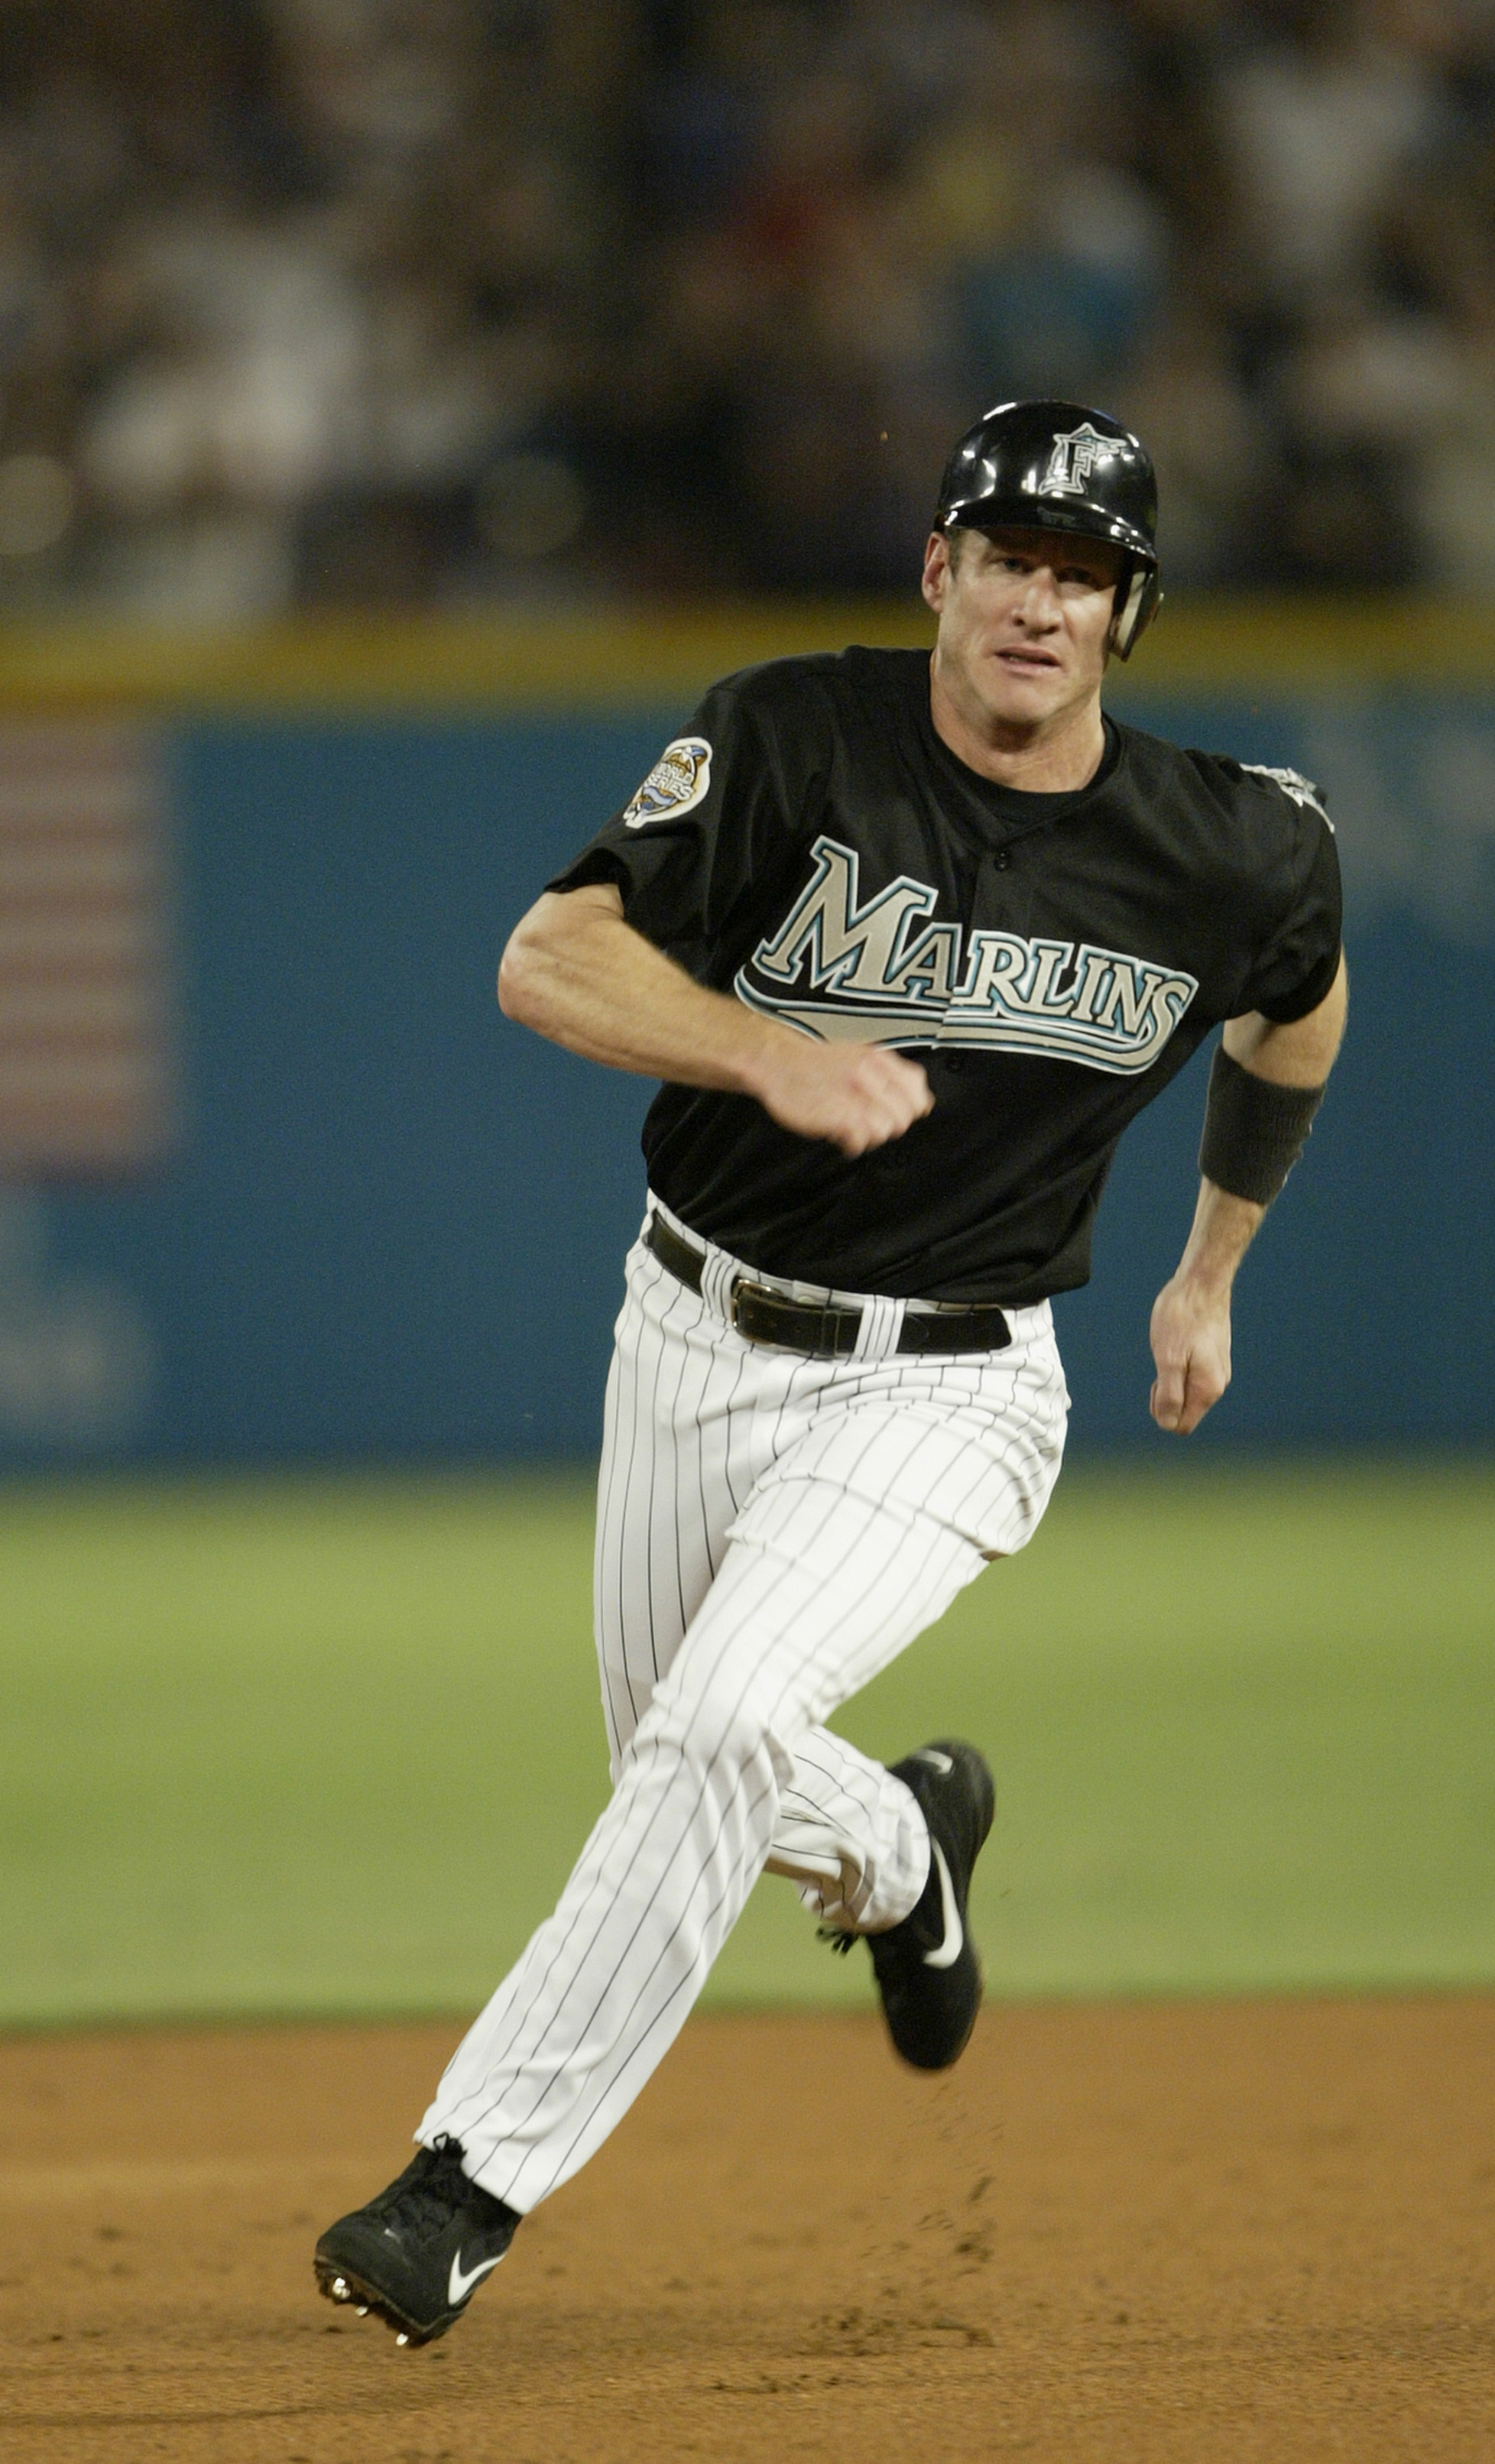 Those were the days: the 2003 Florida Marlins